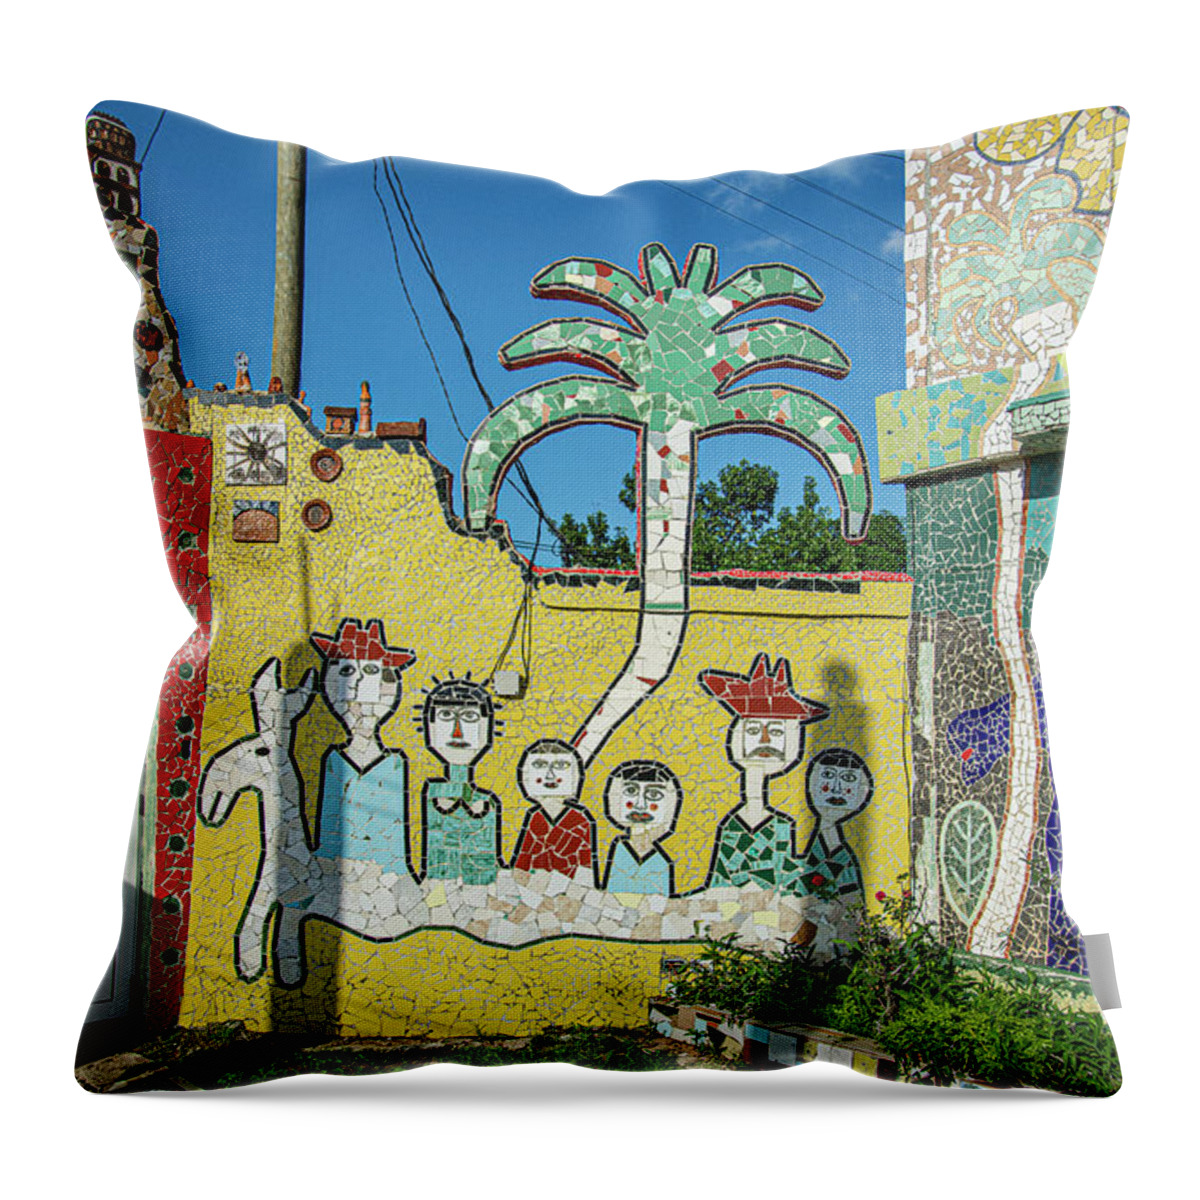 © 2015 Lou Novick All Rights Reversed Throw Pillow featuring the photograph Fusterlandia 13 by Lou Novick